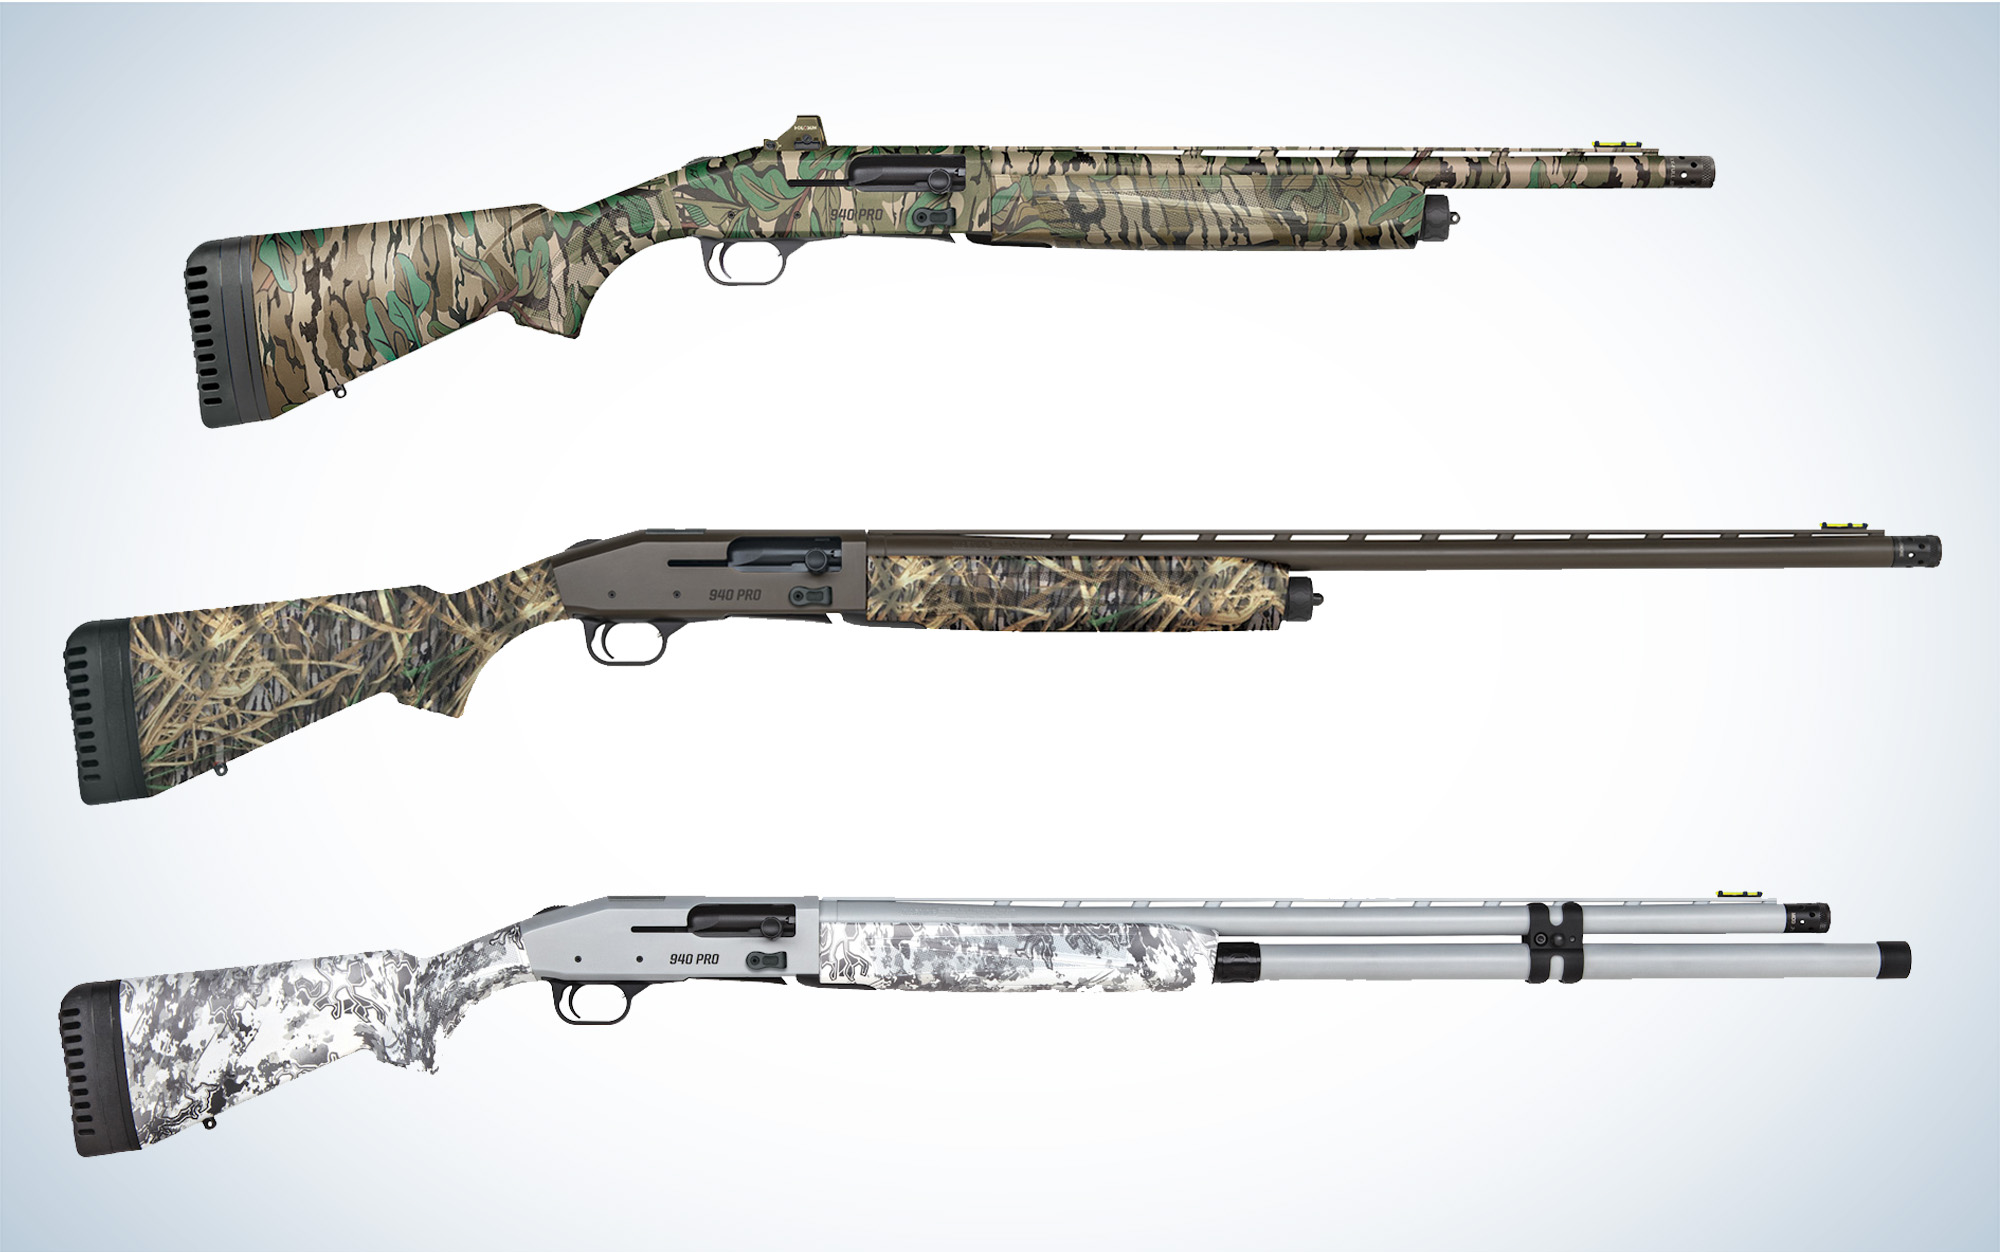 A collection of three semi-auto shotguns, made by Mossberg, that are ready for optics.